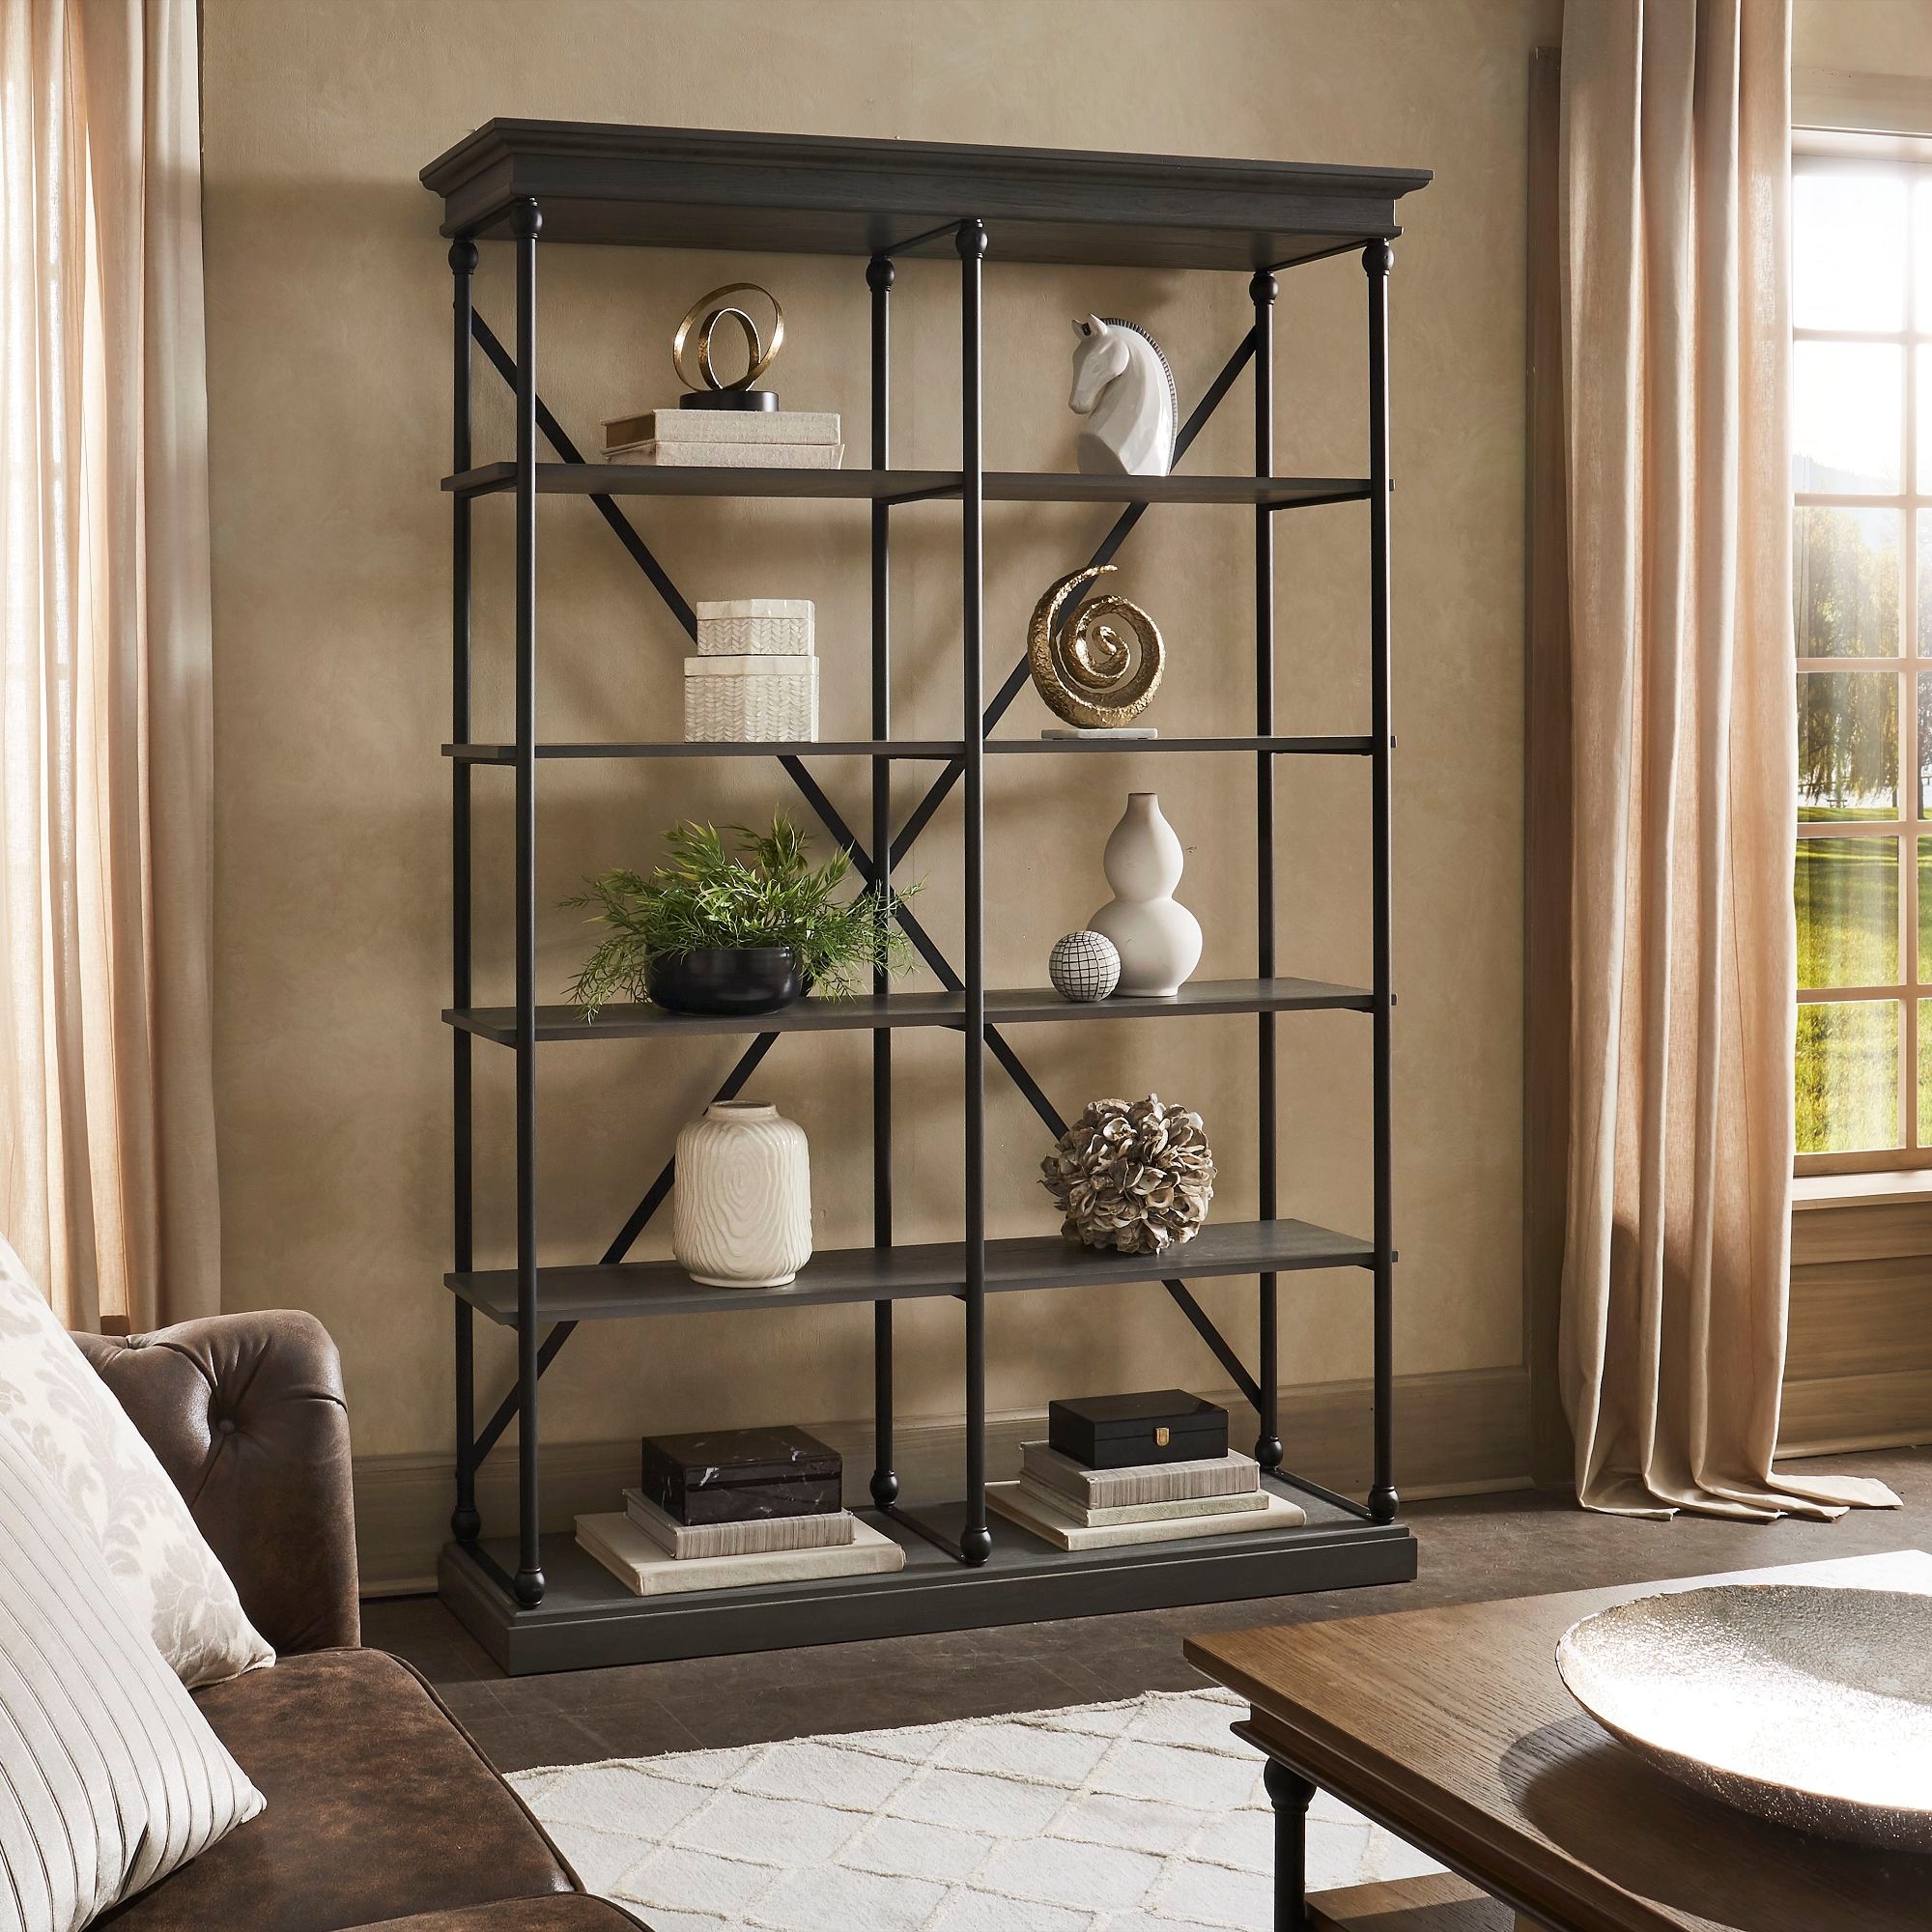 https://ak1.ostkcdn.com/images/products/is/images/direct/e8981da513f7aaca664f422cd50142b56466dd2b/Barnstone-Cornice-Double-Shelving-Bookcase-by-iNSPIRE-Q-Artisan.jpg